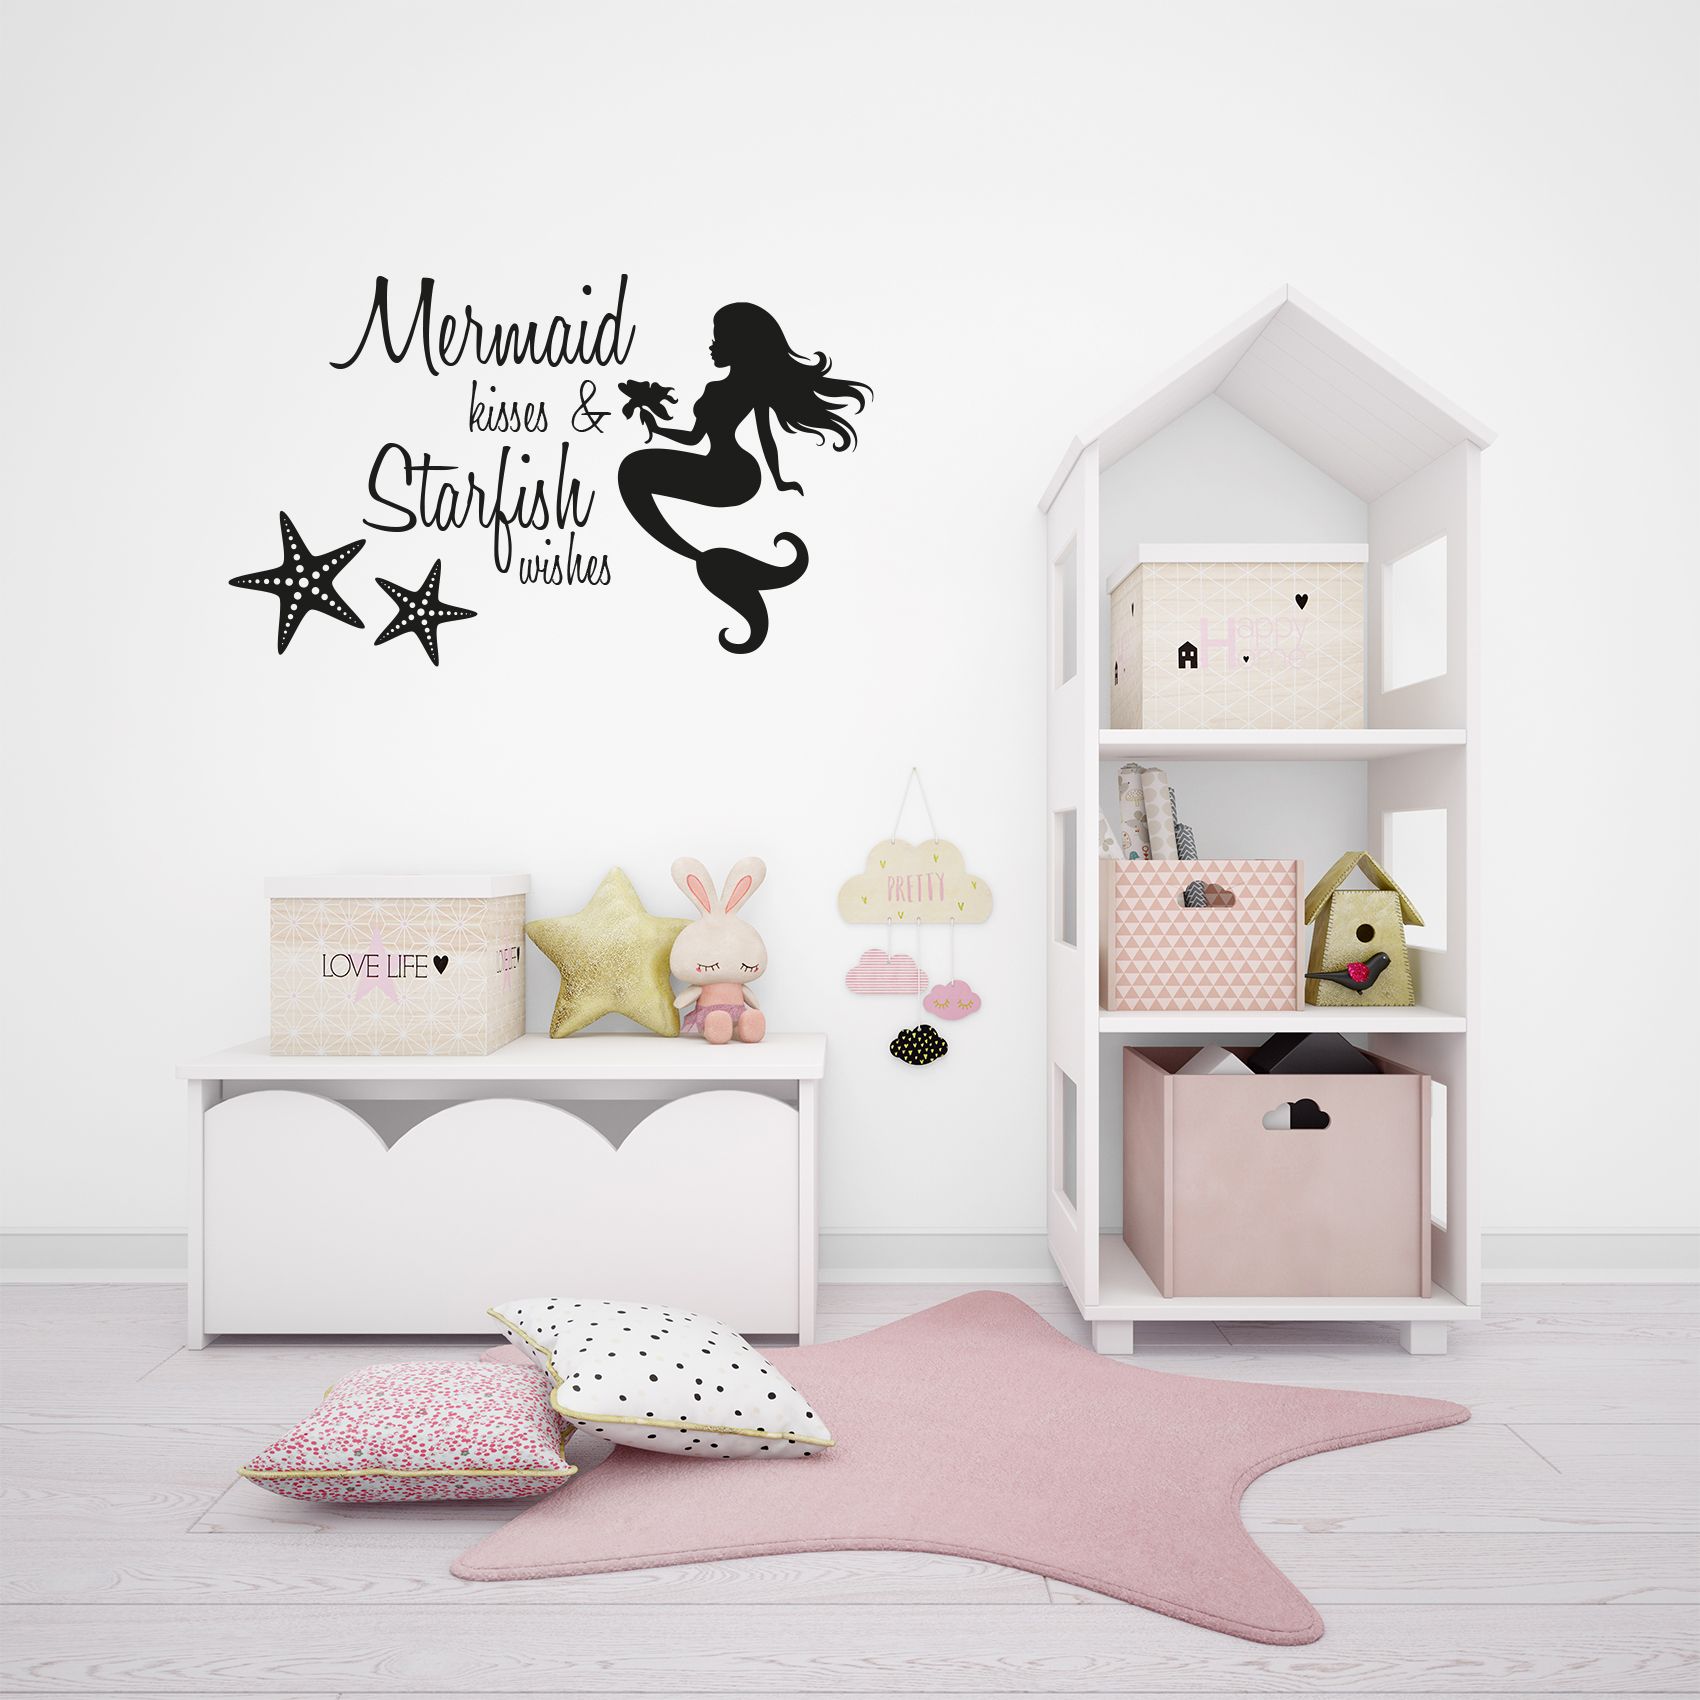 Mermaid Kisses And Starfish Wishes Inspirational Motivation Quote Mermaid Starfish Silhouette Vinyl Wall Art Wall Sticker Wall Decal Home Room Decoration Decal Kids Room Décor Size (10x10 inch) - image 2 of 3